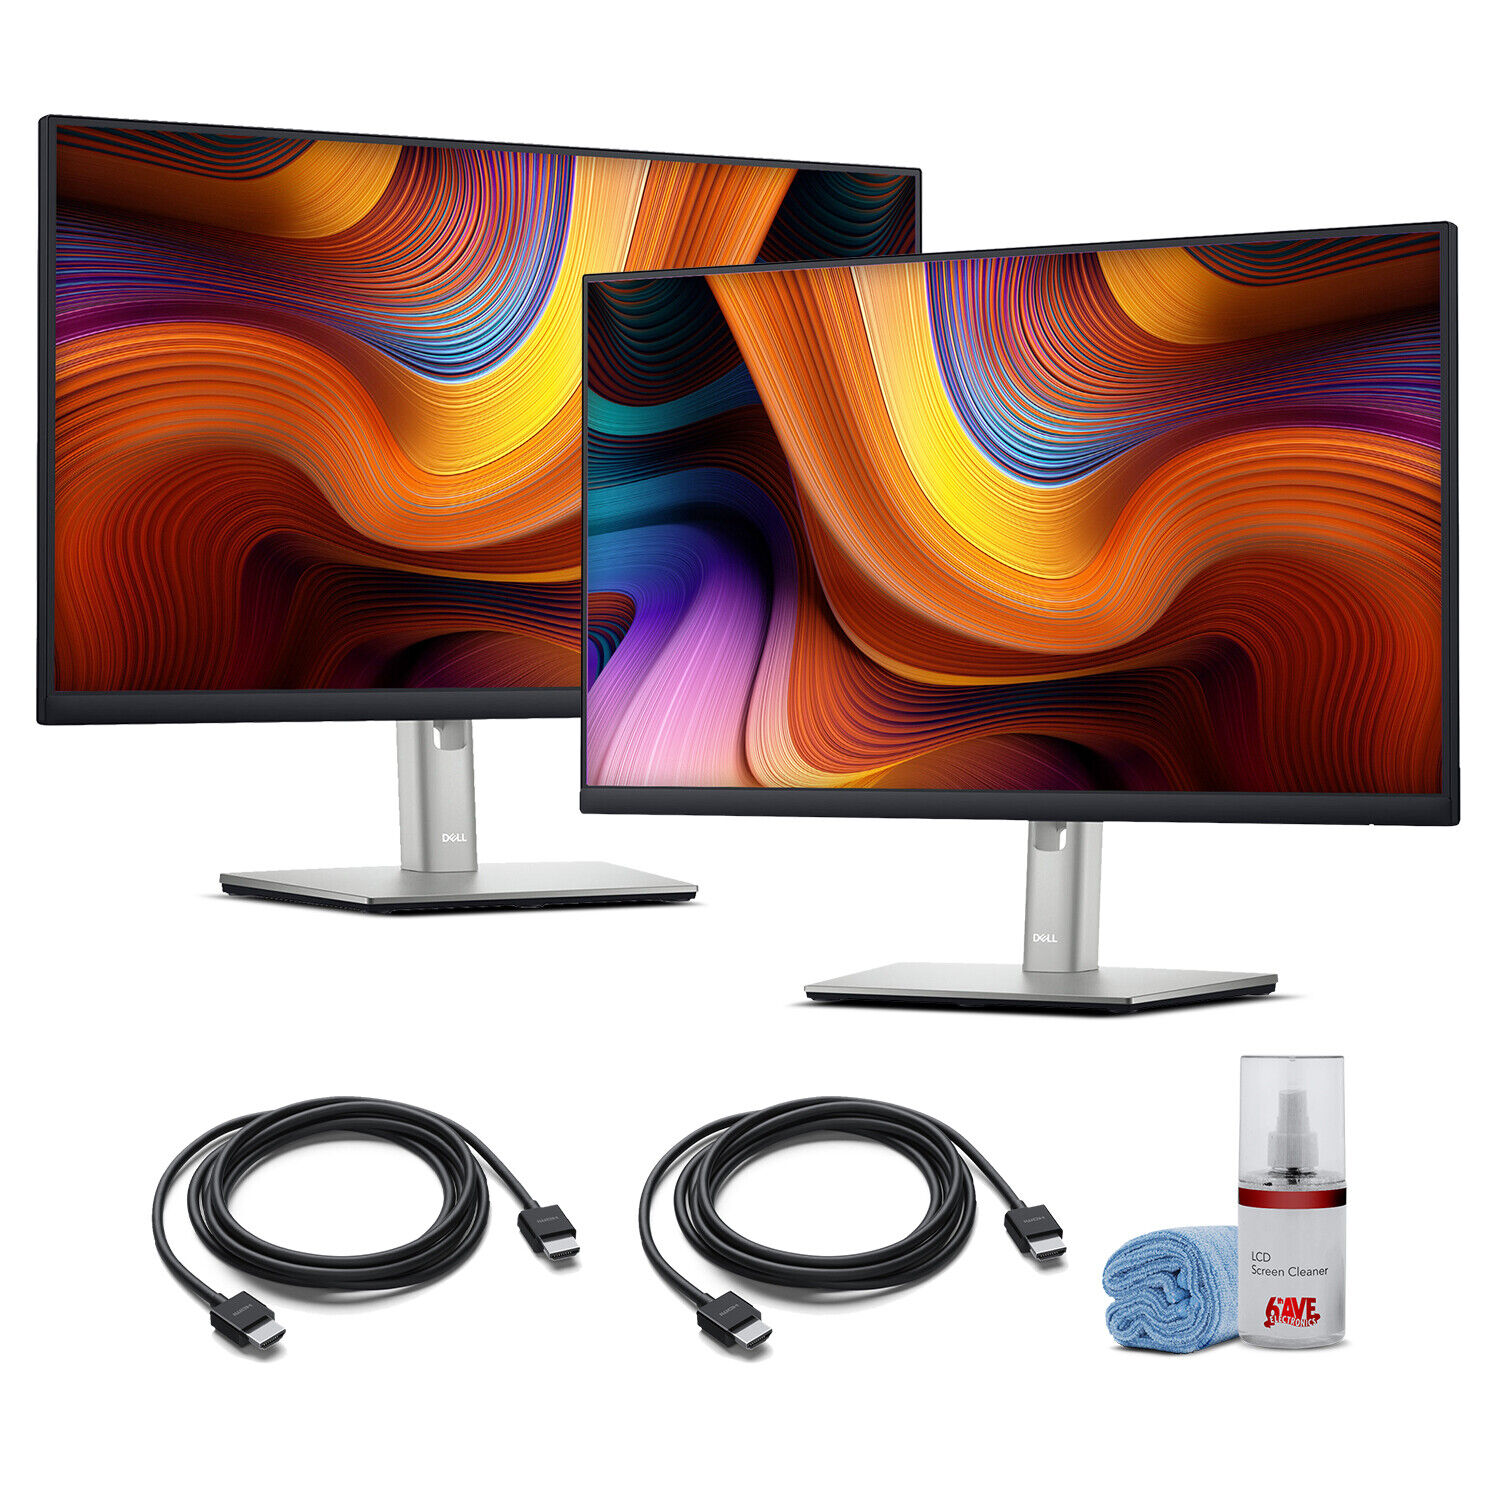 2 x Dell Full HD 1080p, 16:9 IPS Monitor  + 2 x HDMI Cable + LCD Cleaning Kit